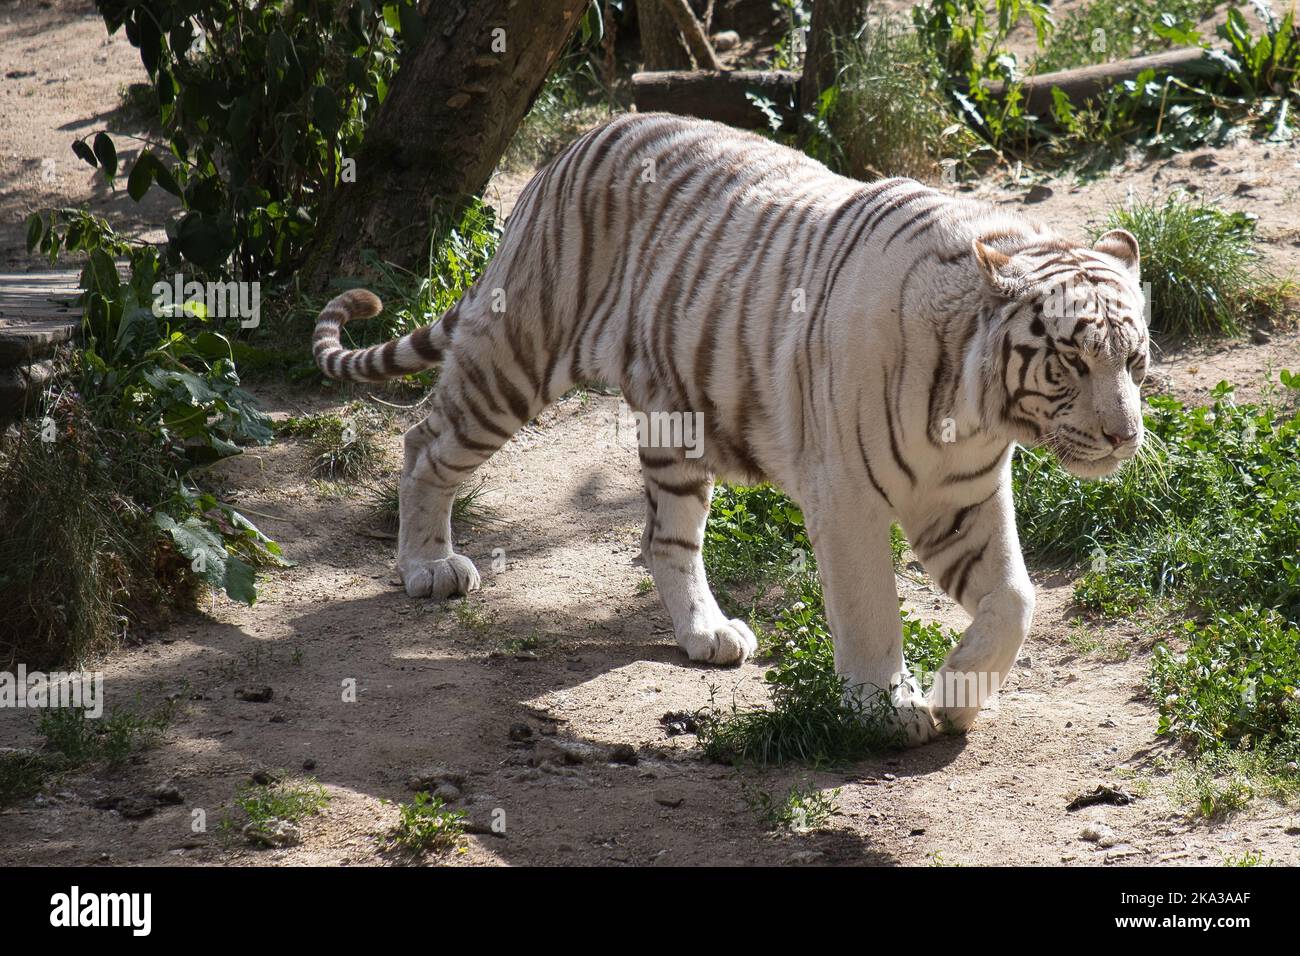 A view of white Bengal tiger walking on sandy and rocky ground surrounded by grass Stock Photo